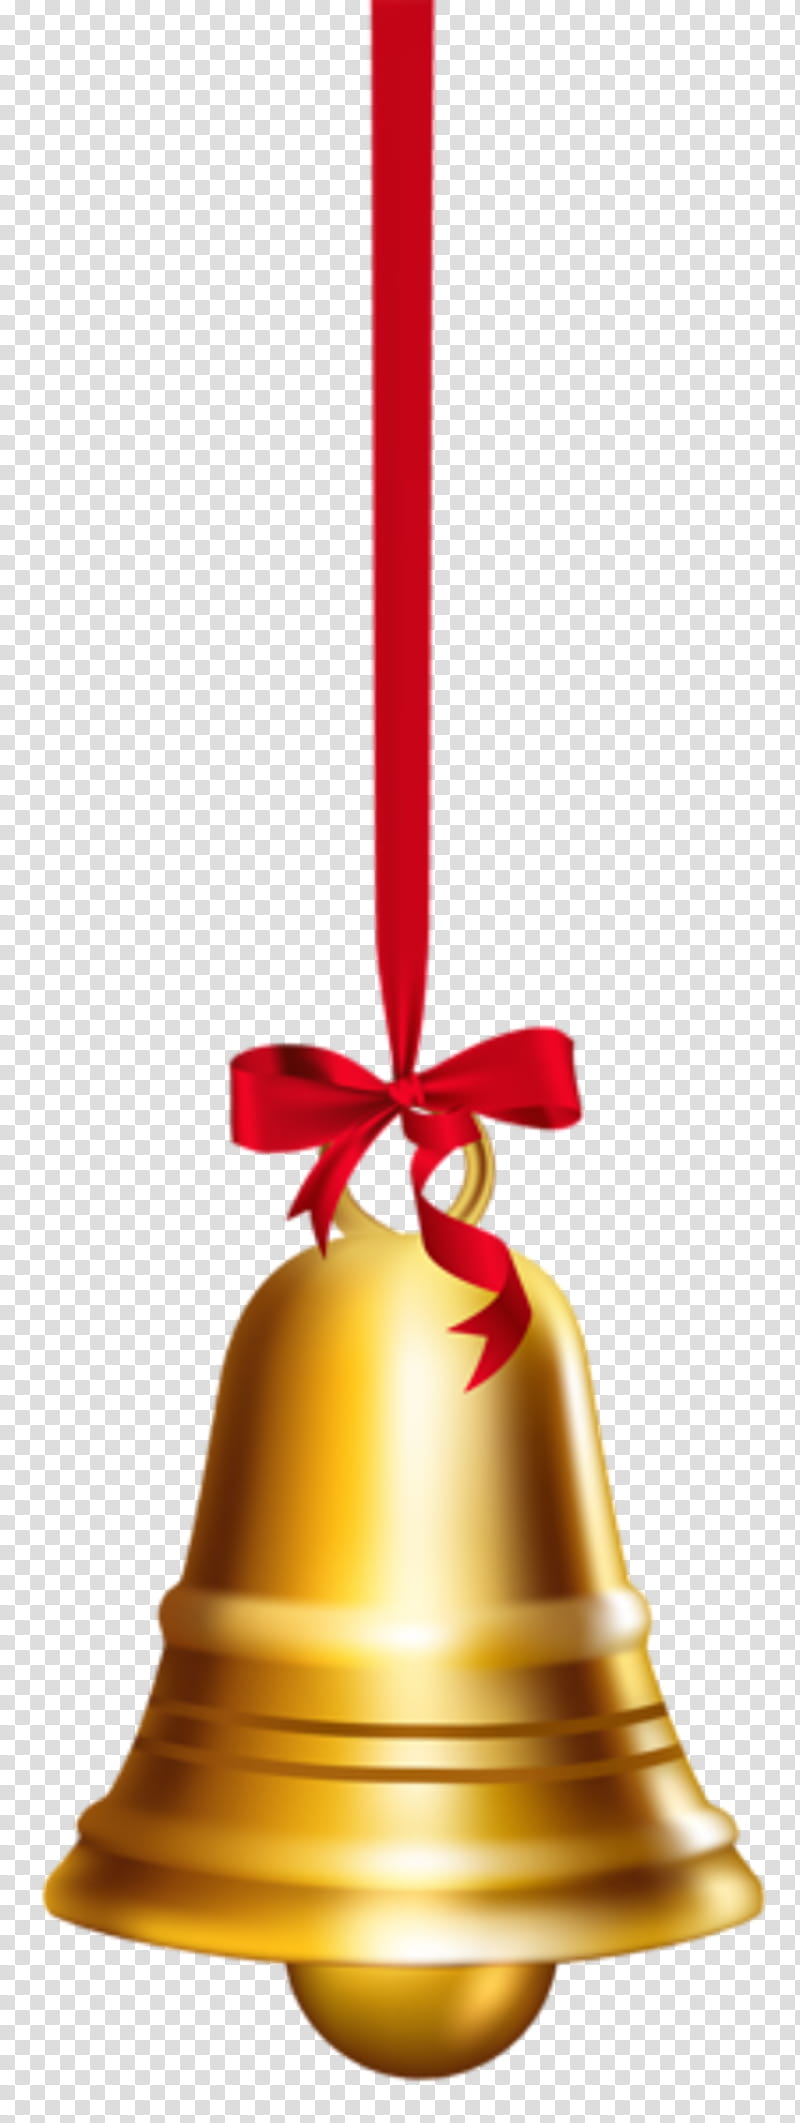 Christmas Bell Drawing, Christmas Day, Christmas, Santa Claus, Cartoon, School Bell, Jingle Bell transparent background PNG clipart